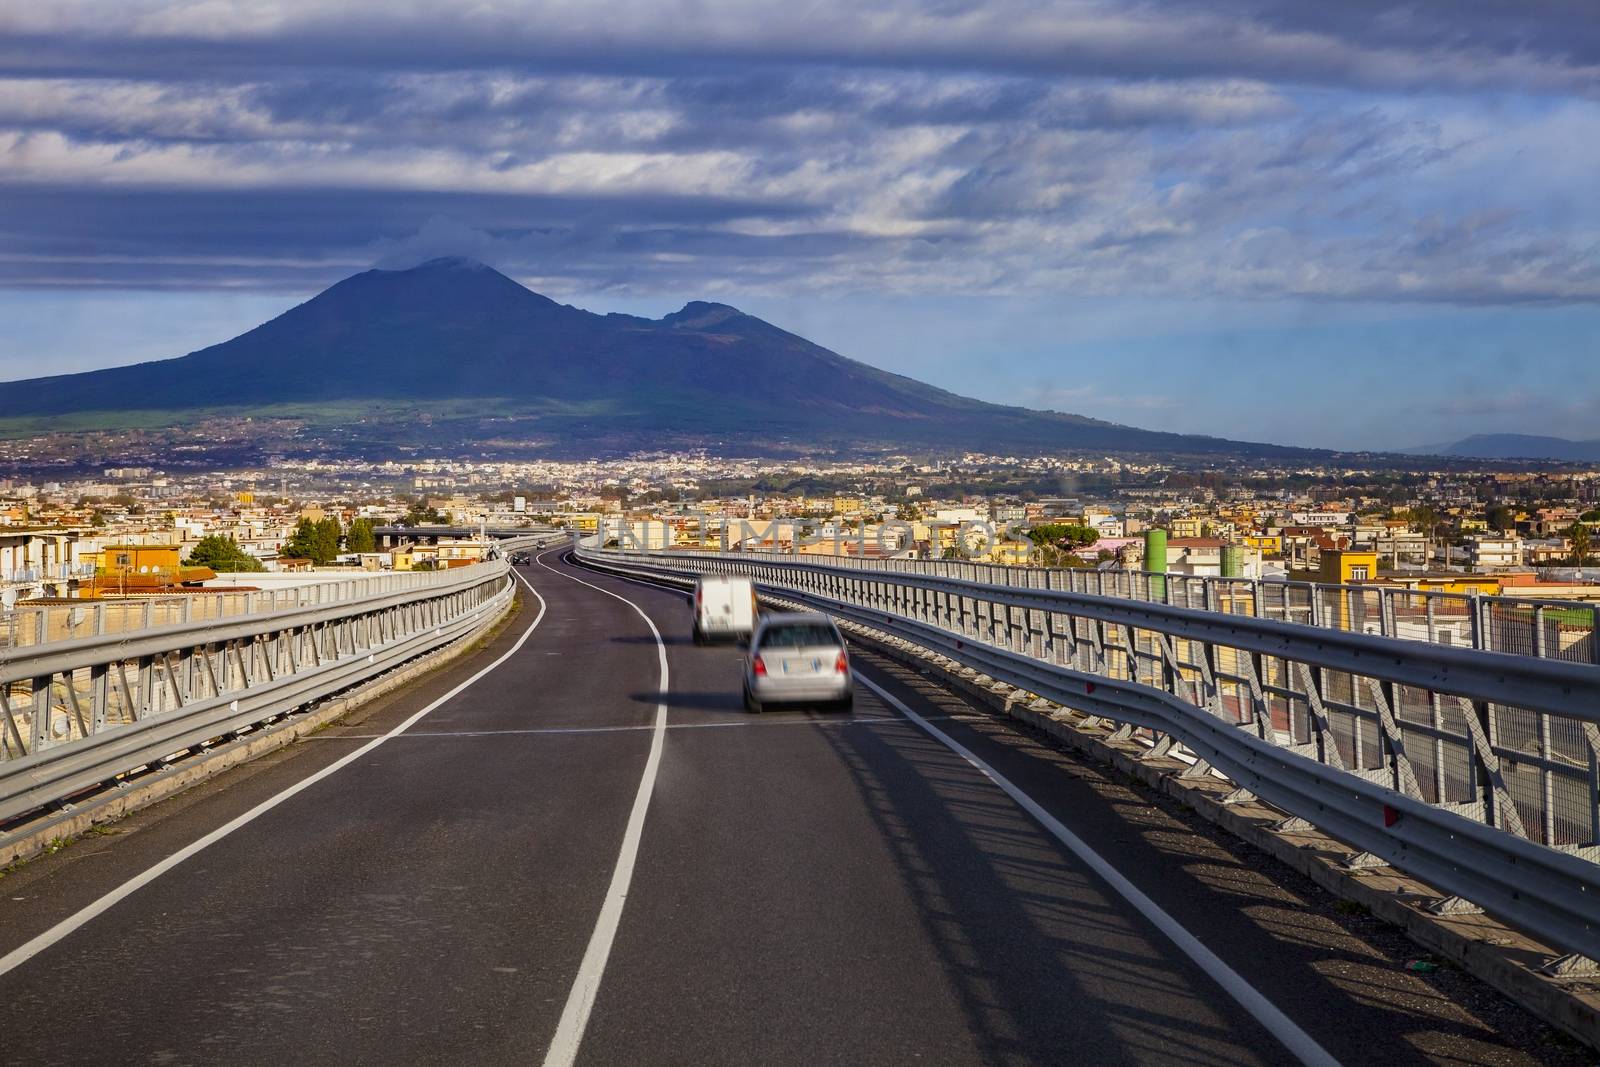 A one motorway from naple to rome passing naple town and vesuviu by khunaspix